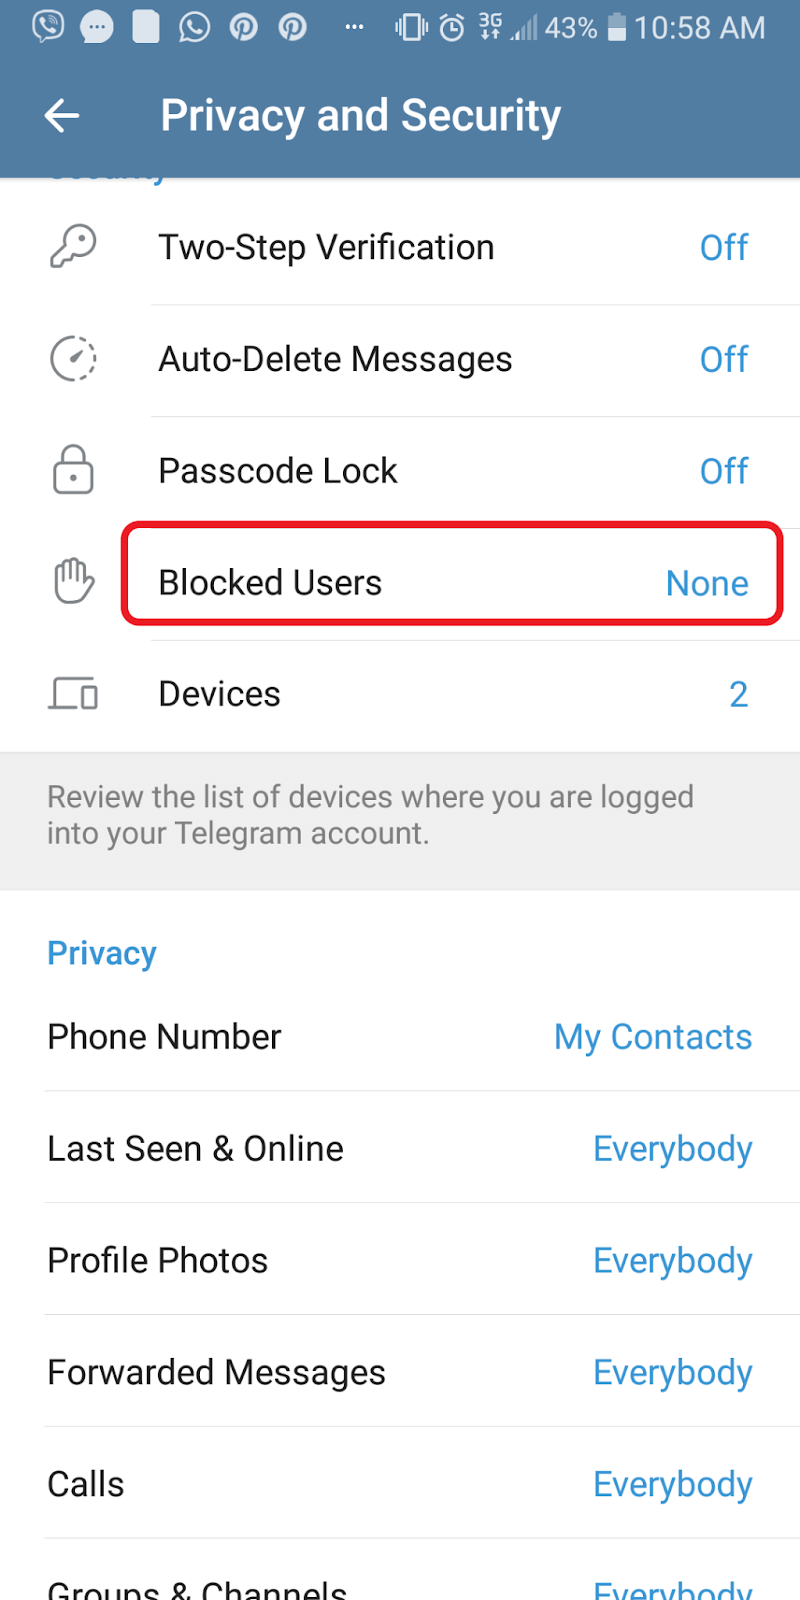 Under the security and privacy settings is an option to block users